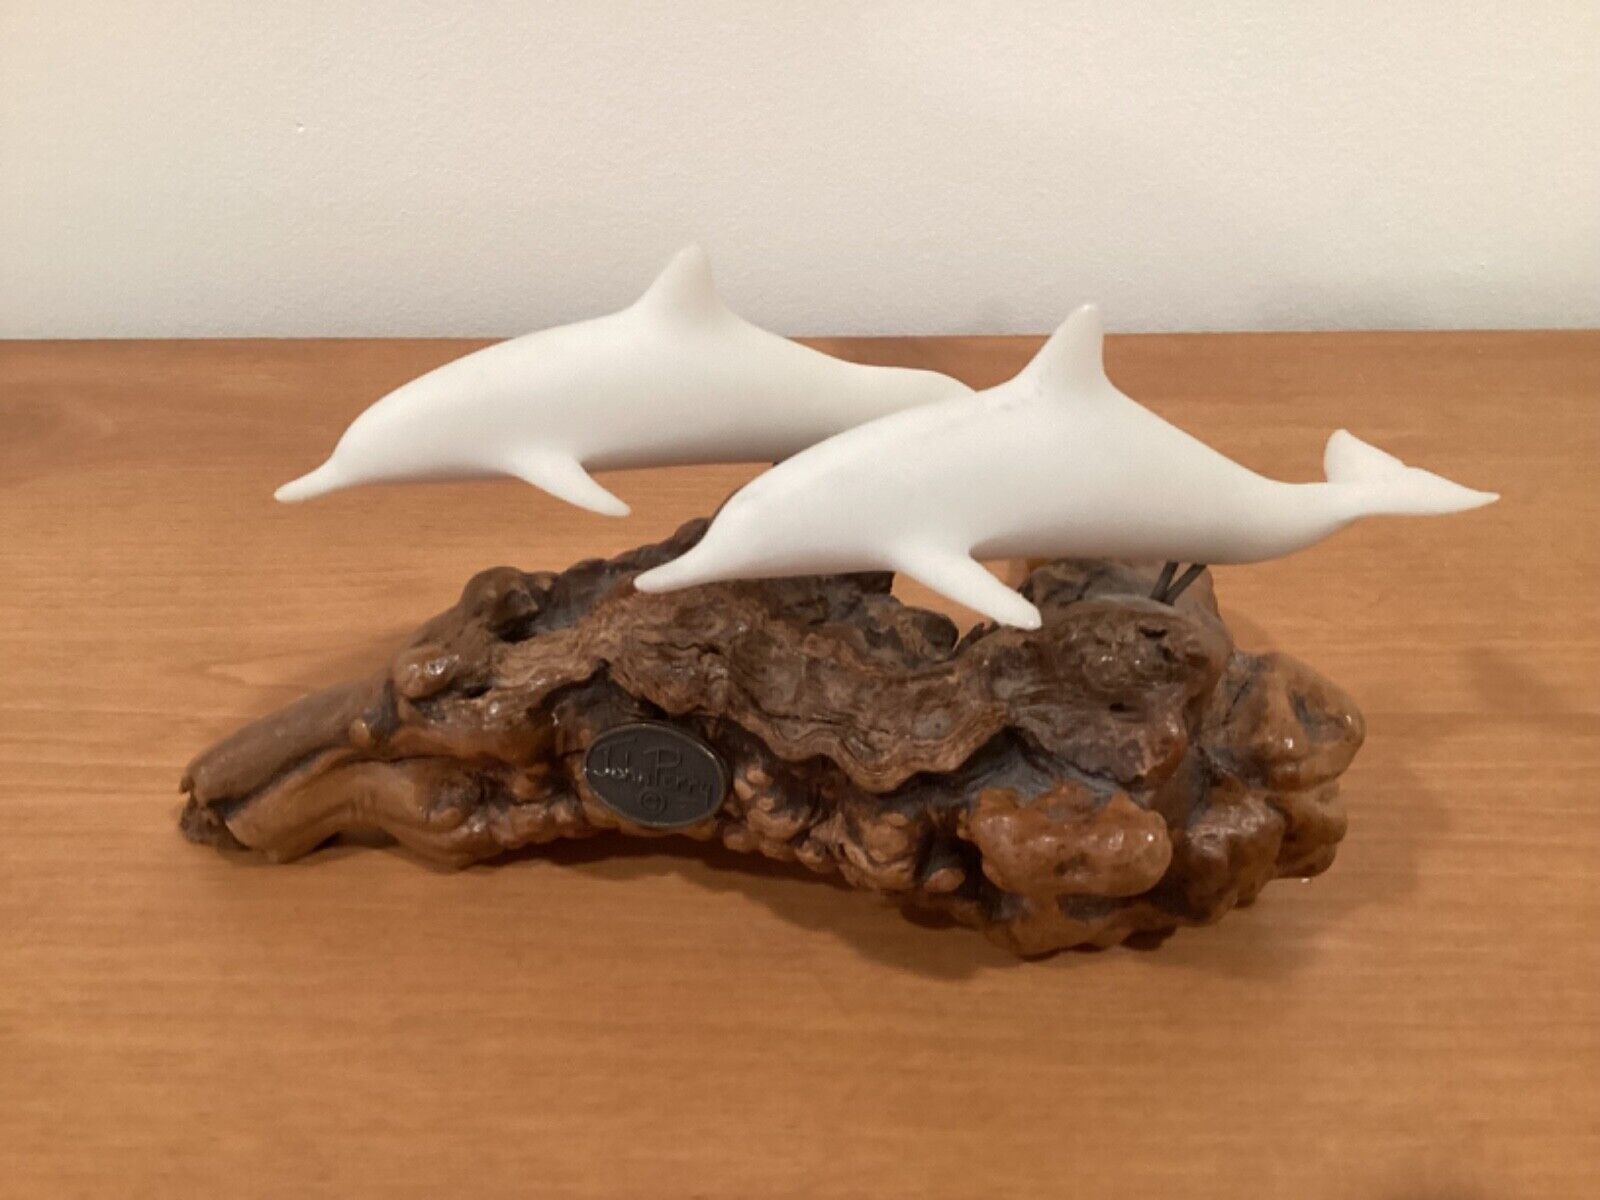 John Perry 2 Dolphins On Burl Drift Wood Vintage. Approx. 7”long. Dolphin 4 1/2”